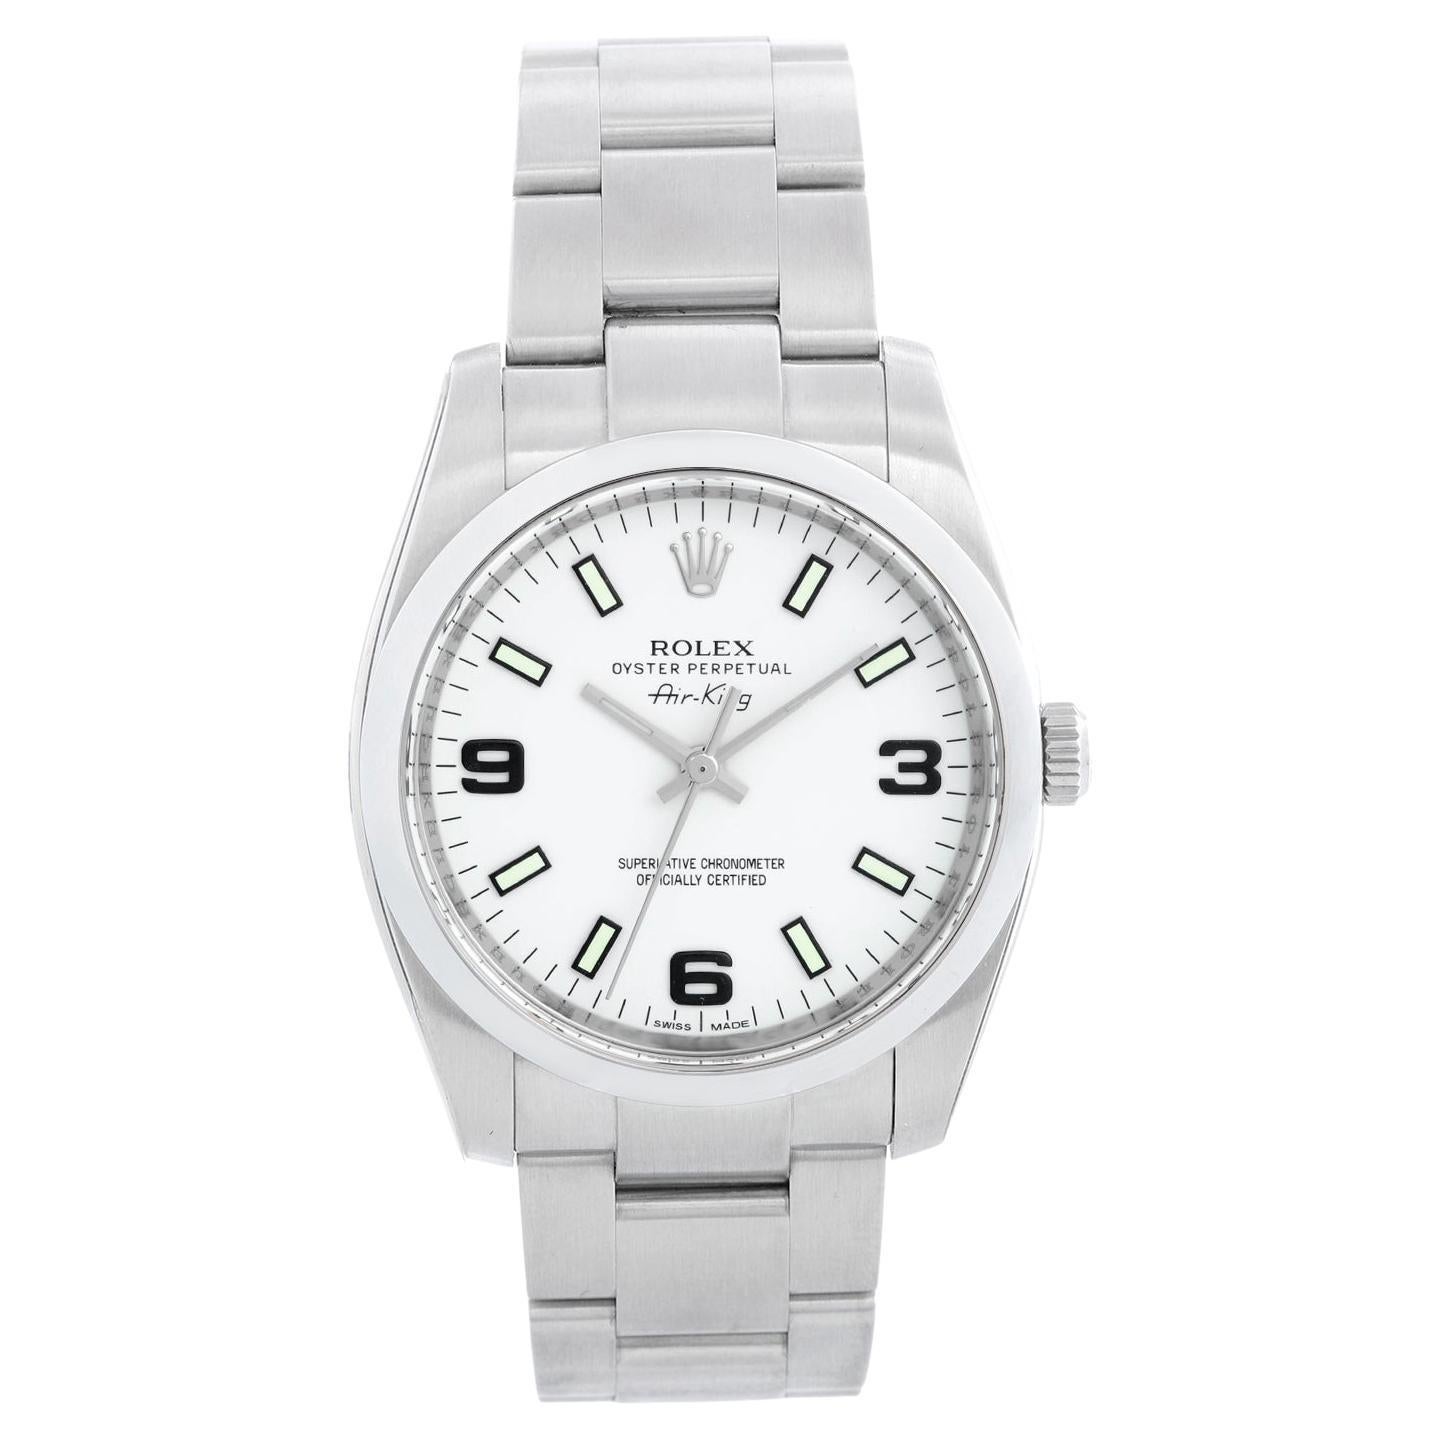 Rolex Air-King Men's Stainless Steel Watch White Dial 114200 For Sale